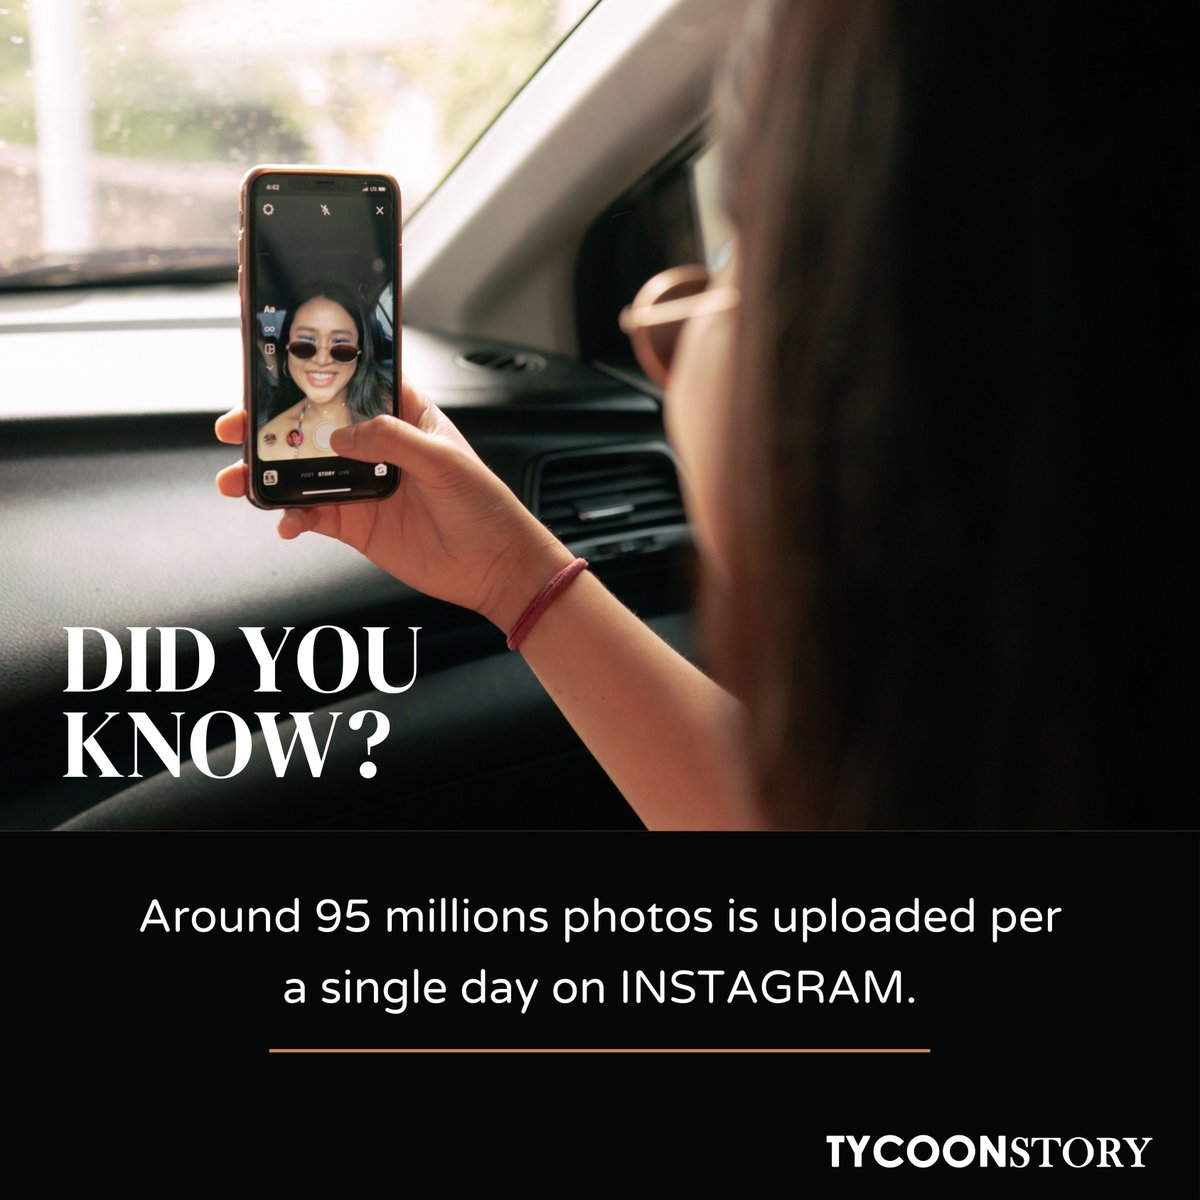 #DidYouKnow

 #facts #knowledge #factsdaily #didyouknowfacts #dailyfacts #instagram #instagrampost #instagramphotos #technology #amazingfacts #knowledgeispower #interestingfacts @TycoonStoryCo @tycoonstory2020